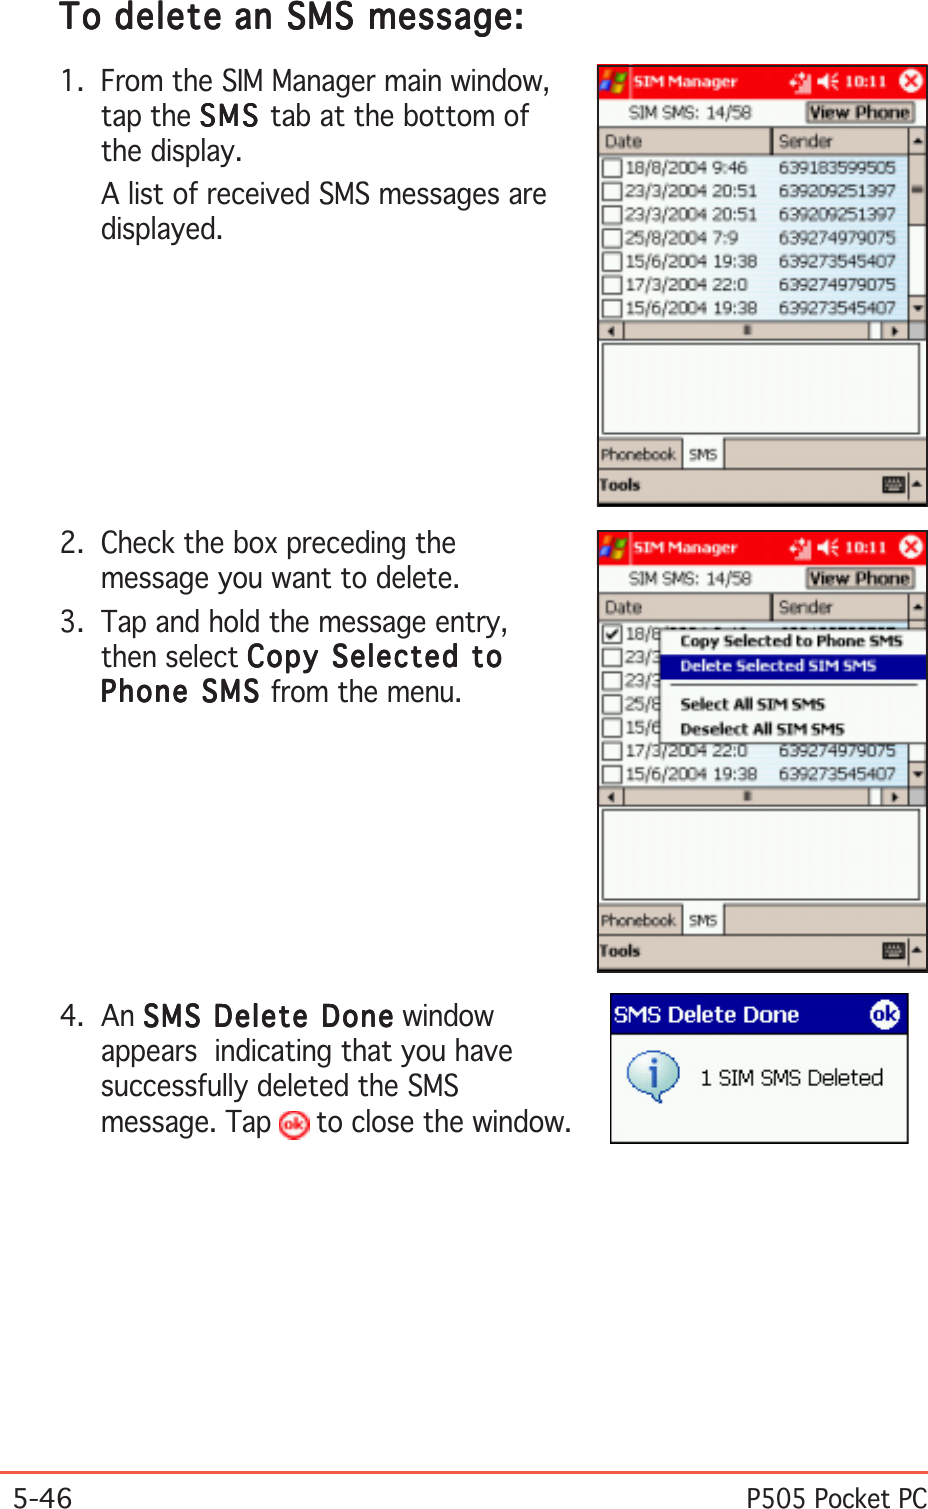 5-46P505 Pocket PCToToToToTo deletedeletedeletedeletedelete an SMS message: an SMS message: an SMS message: an SMS message: an SMS message:1. From the SIM Manager main window,tap the SMSSMSSMSSMSSM S tab at the bottom ofthe display.A list of received SMS messages aredisplayed.4. An SMS Delete DoneSMS Delete DoneSMS Delete DoneSMS Delete DoneSMS Delete Done windowappears  indicating that you havesuccessfully deleted the SMSmessage. Tap   to close the window.2. Check the box preceding themessage you want to delete.3. Tap and hold the message entry,then select Copy Selected toCopy Selected toCopy Selected toCopy Selected toCopy Selected toPhone SMS Phone SMS Phone SMS Phone SMS Phone SMS from the menu.